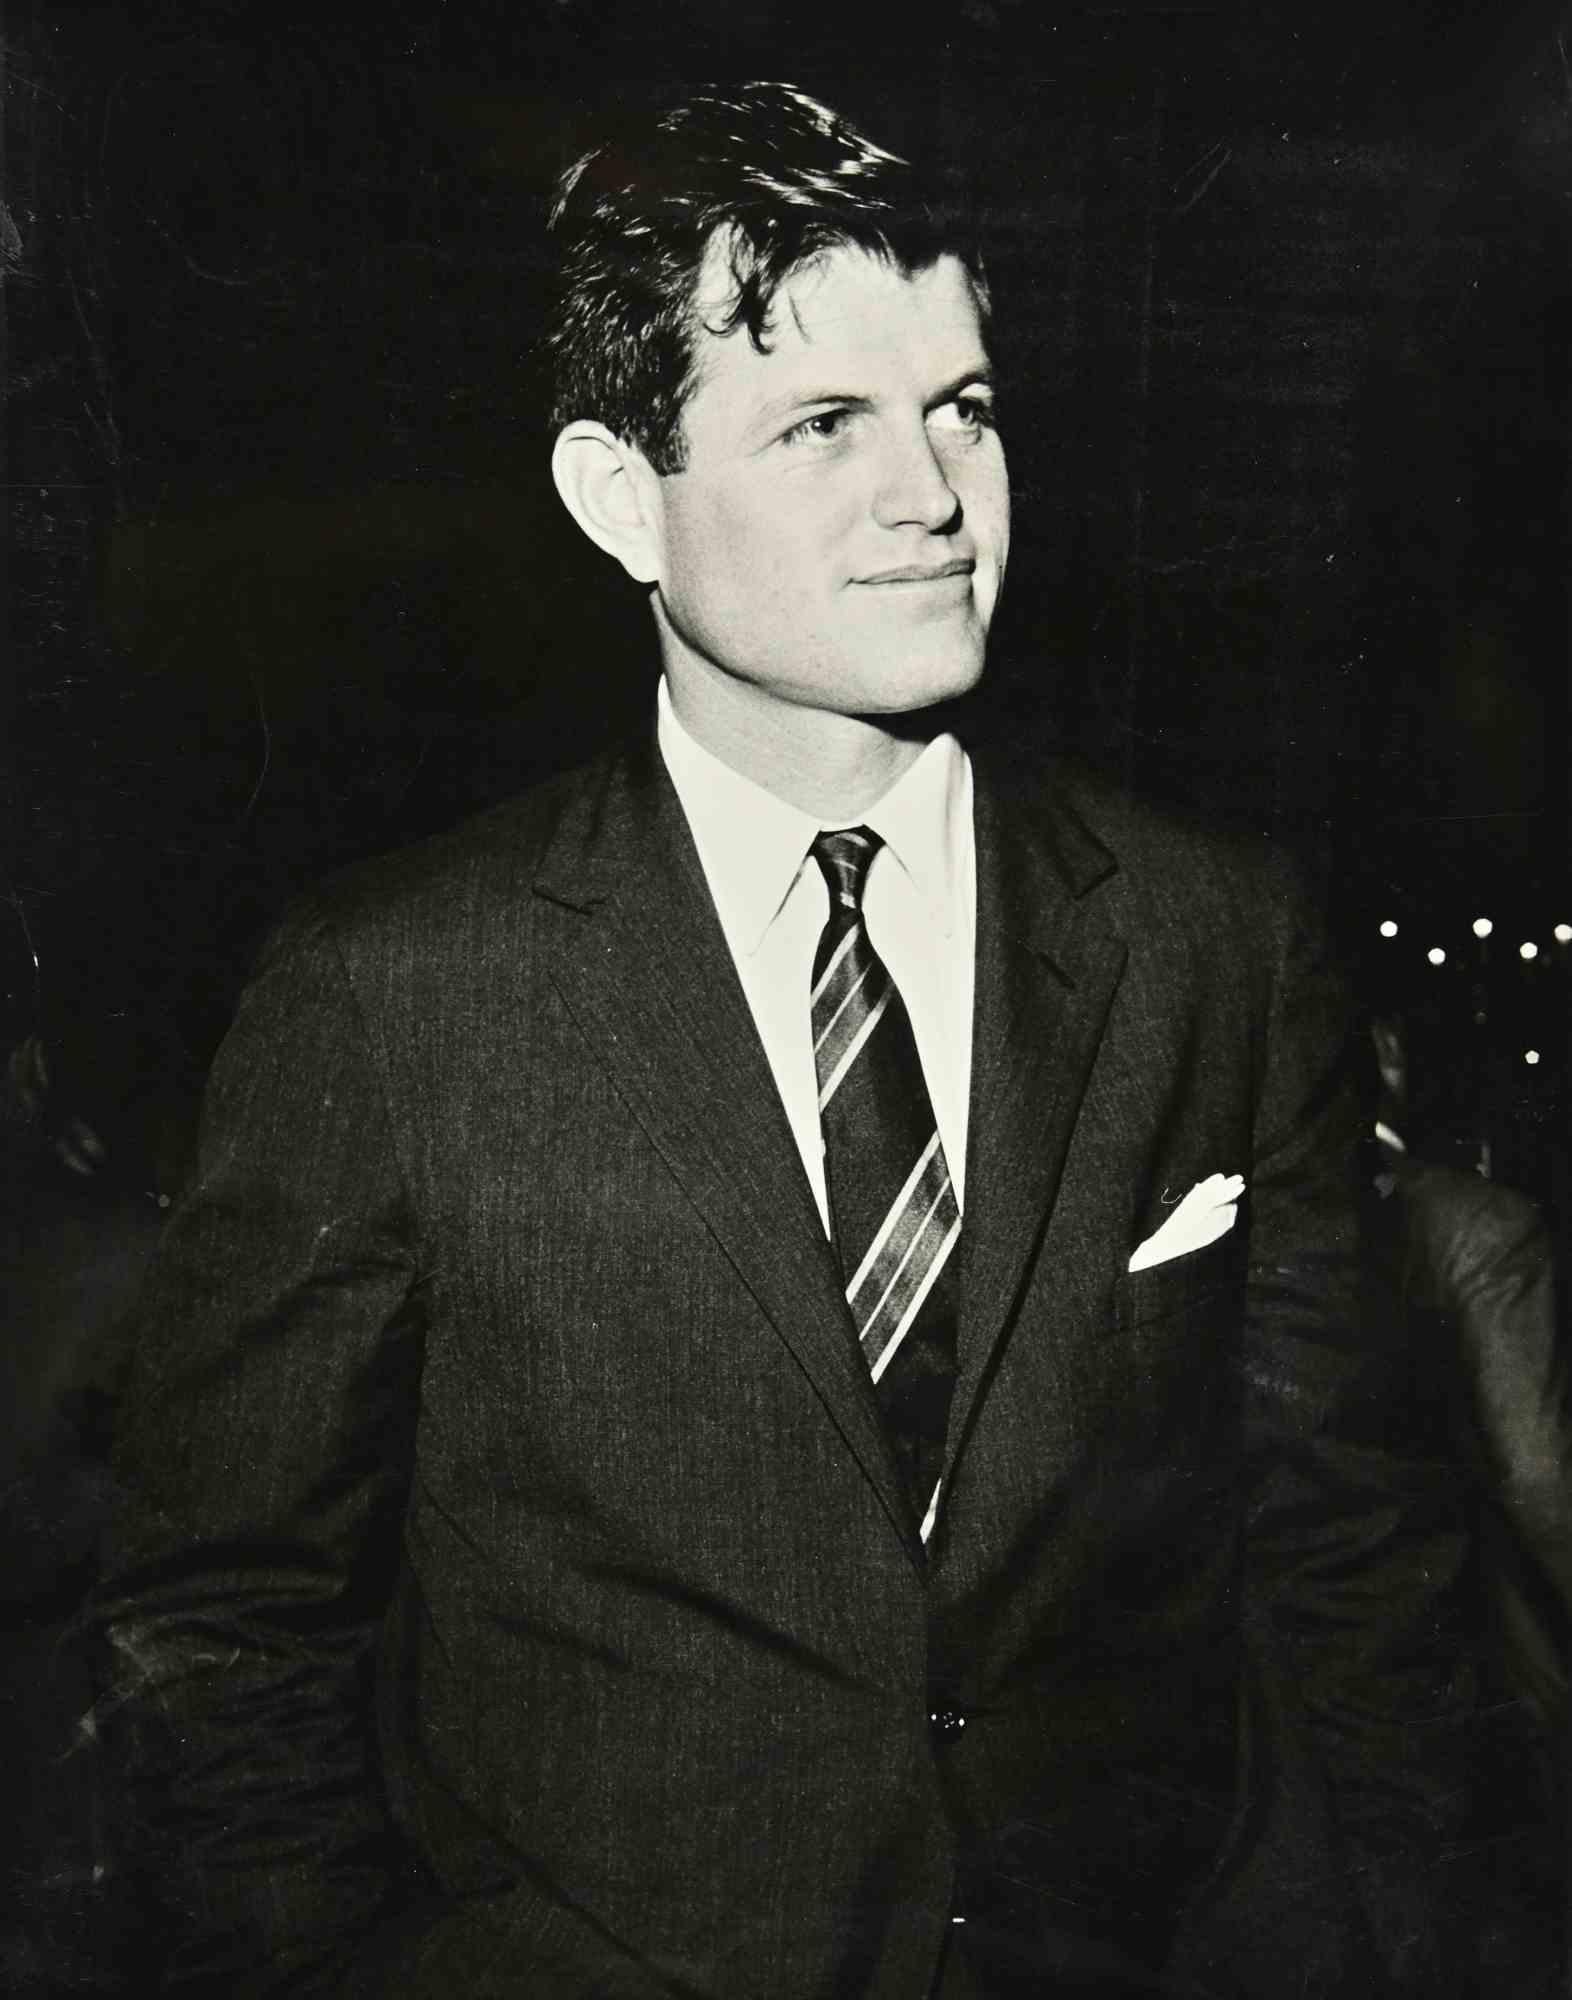 Unknown Black and White Photograph - Ted Kennedy - Vintage b/w Photo - 1960s